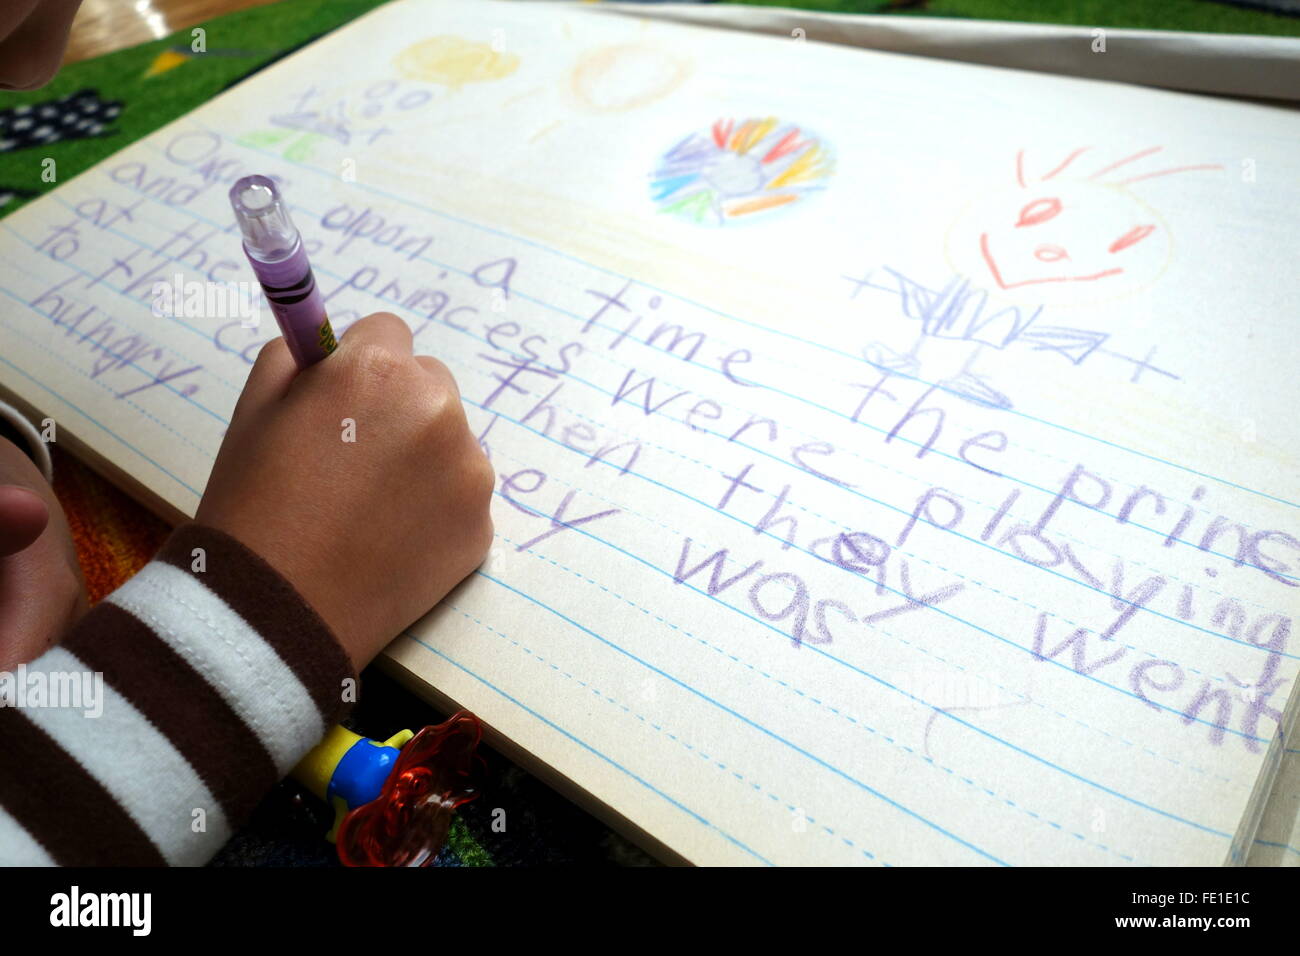 A young child writing a story on a drawing pad Stock Photo